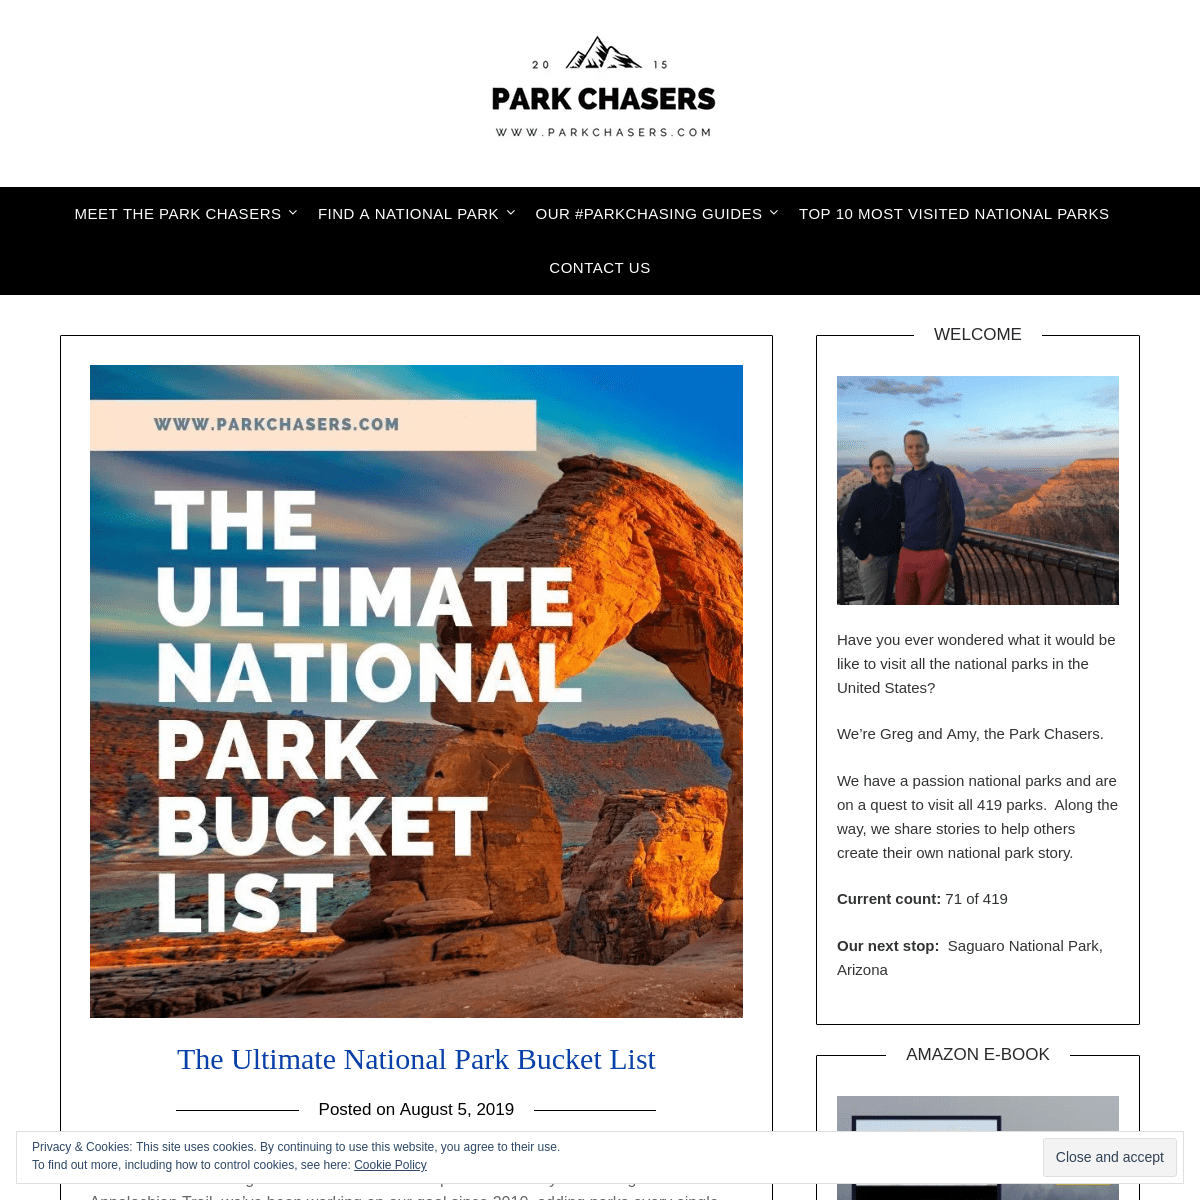 Park Chasers - Travel Along One Couple's Quest to Visit all 419 National Parks